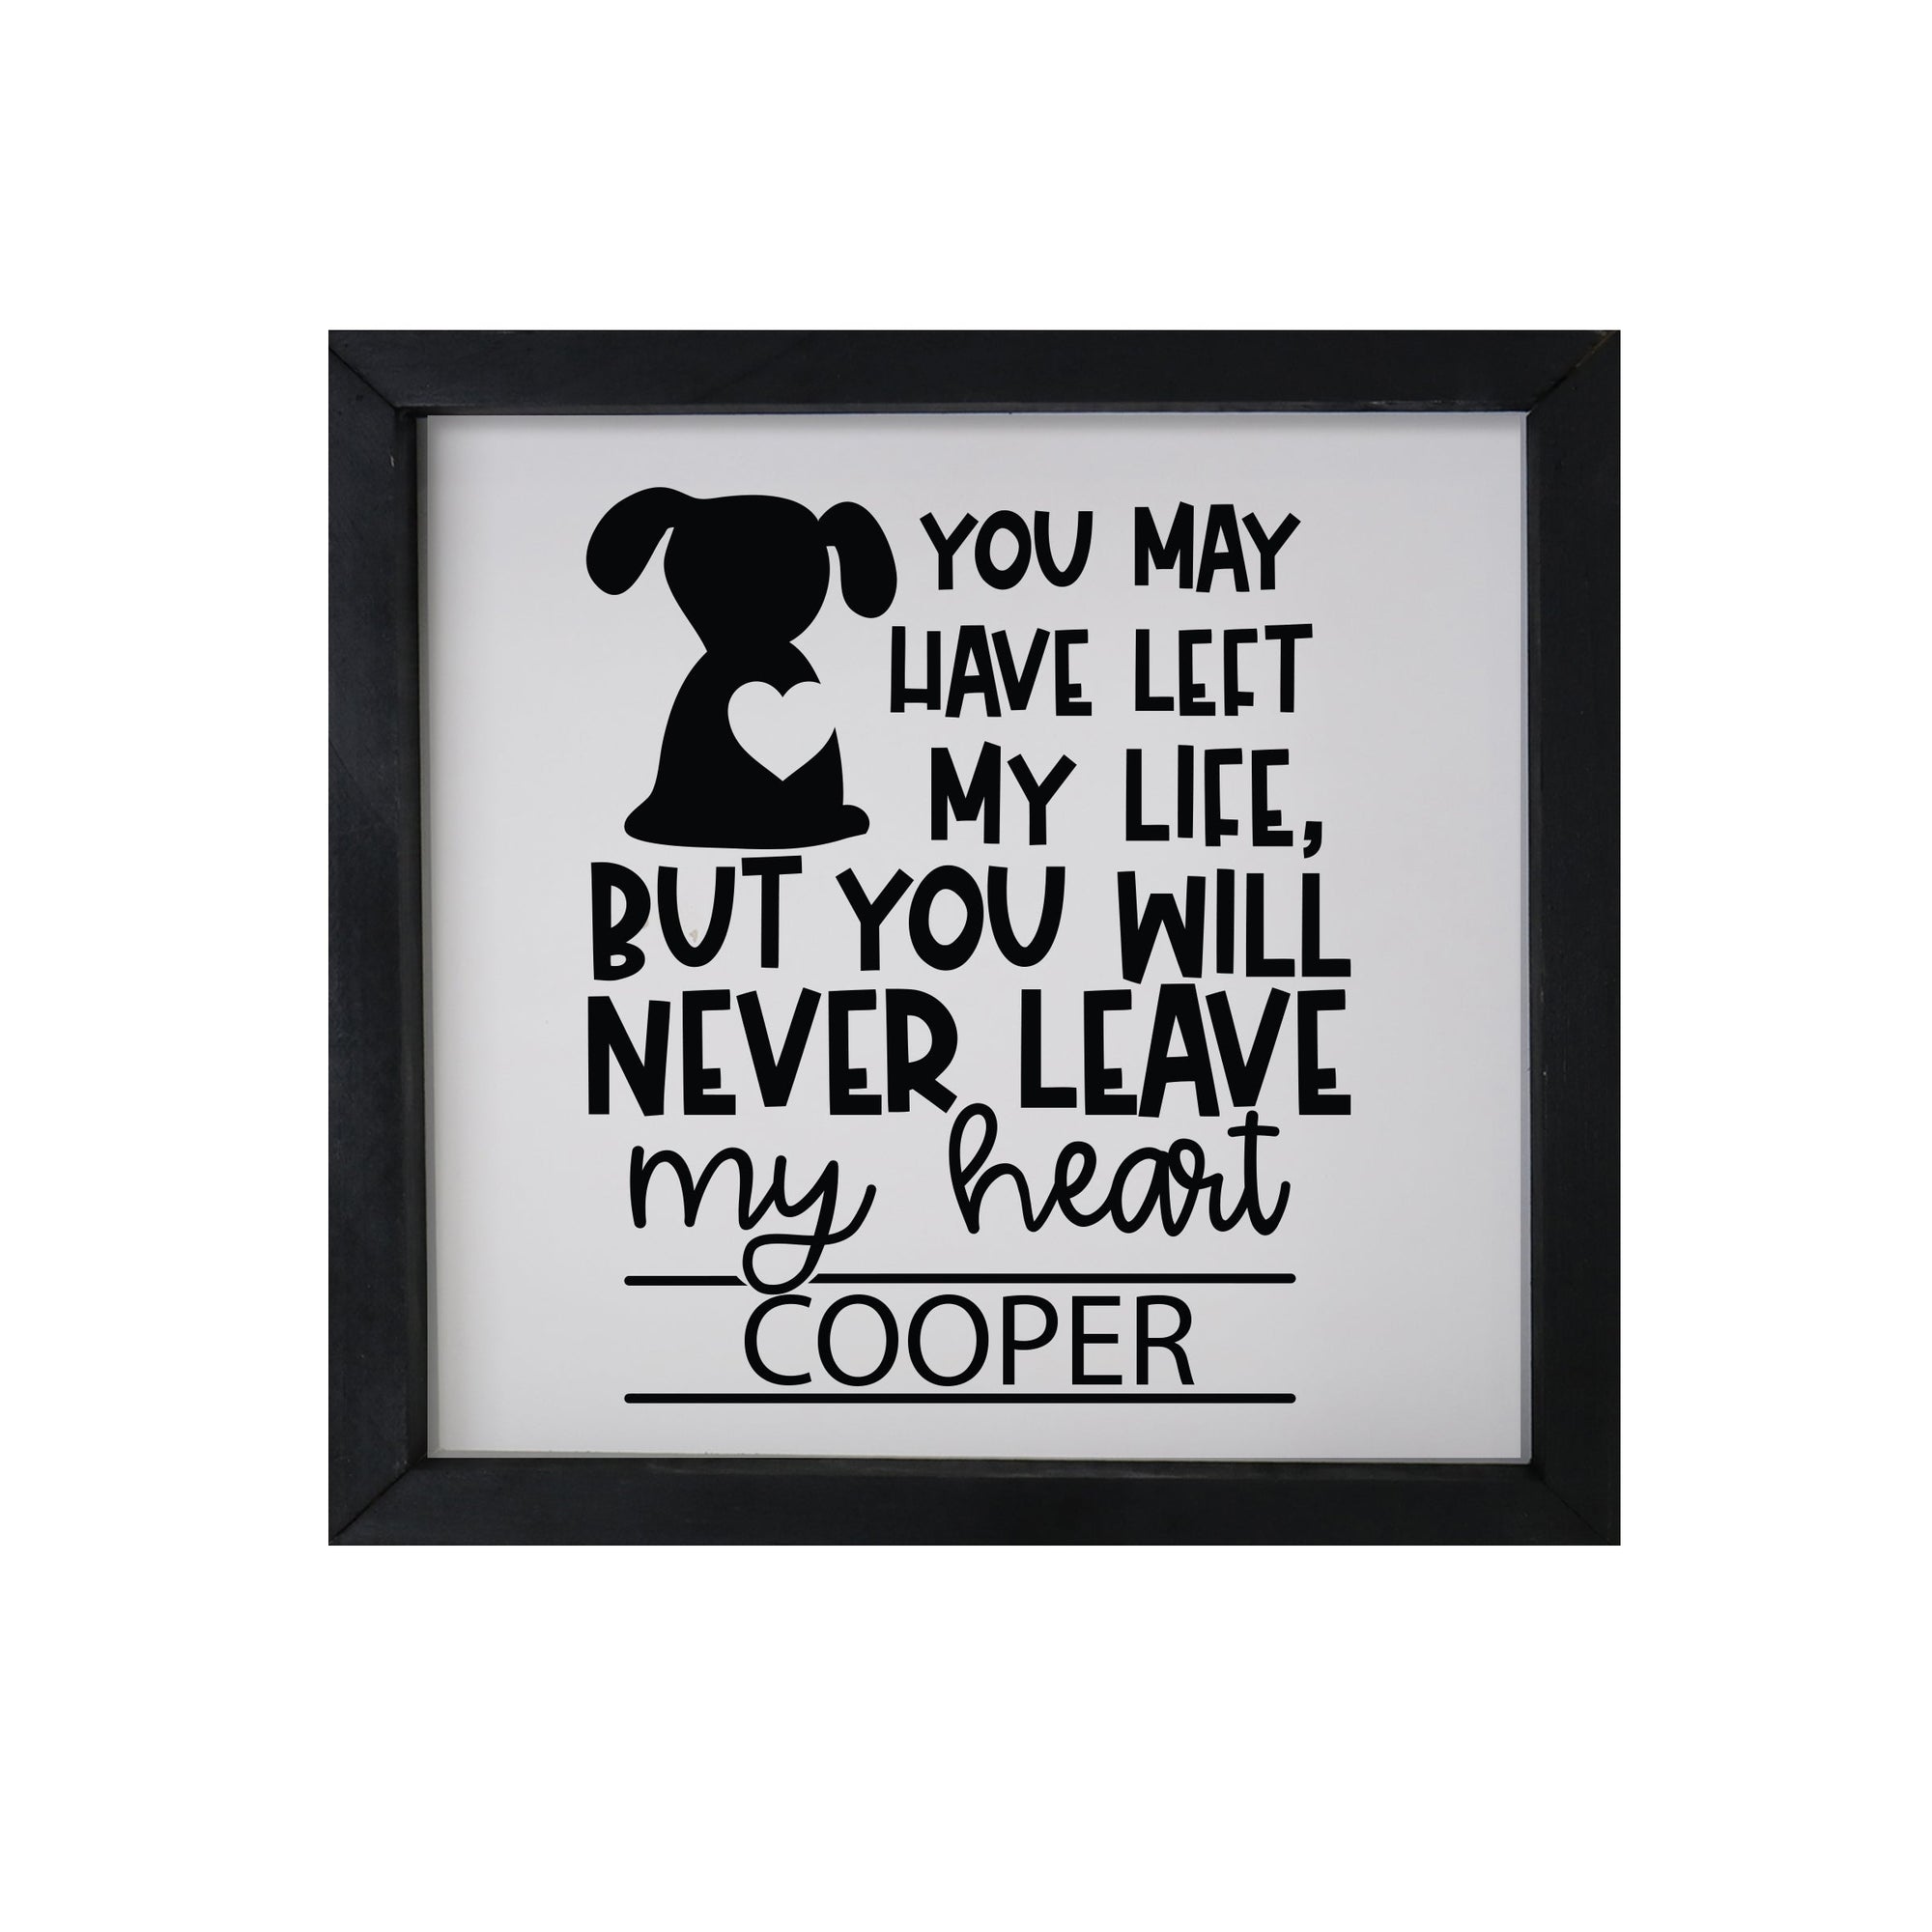 11.5x11.5 Black Framed Pet Memorial Shadow Box with phrase "You May Have Left My Life, But You Will Never Leave My Heart"